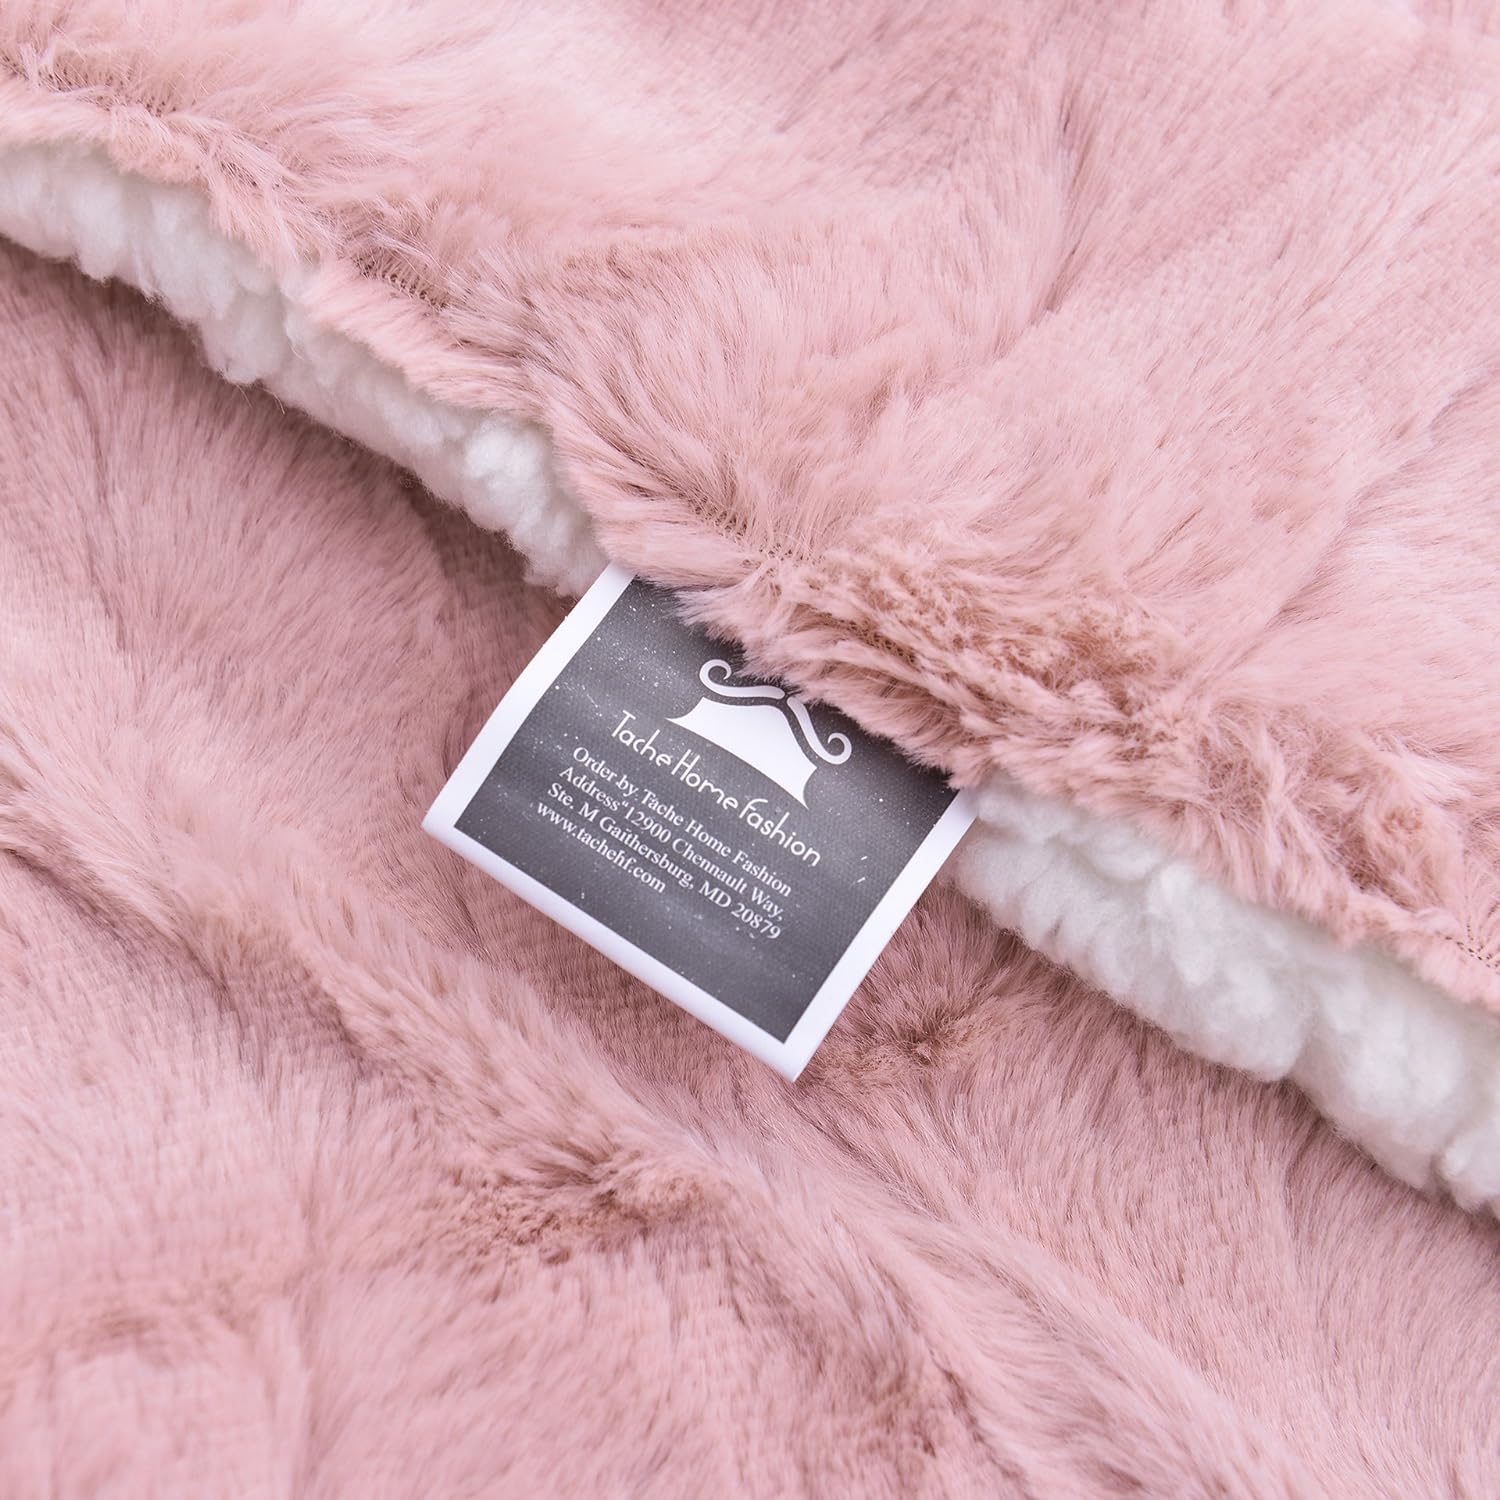 A luxurious pink satin blanket with a plush pink fleece reverse. The blanket is gently rumpled, inviting snuggles